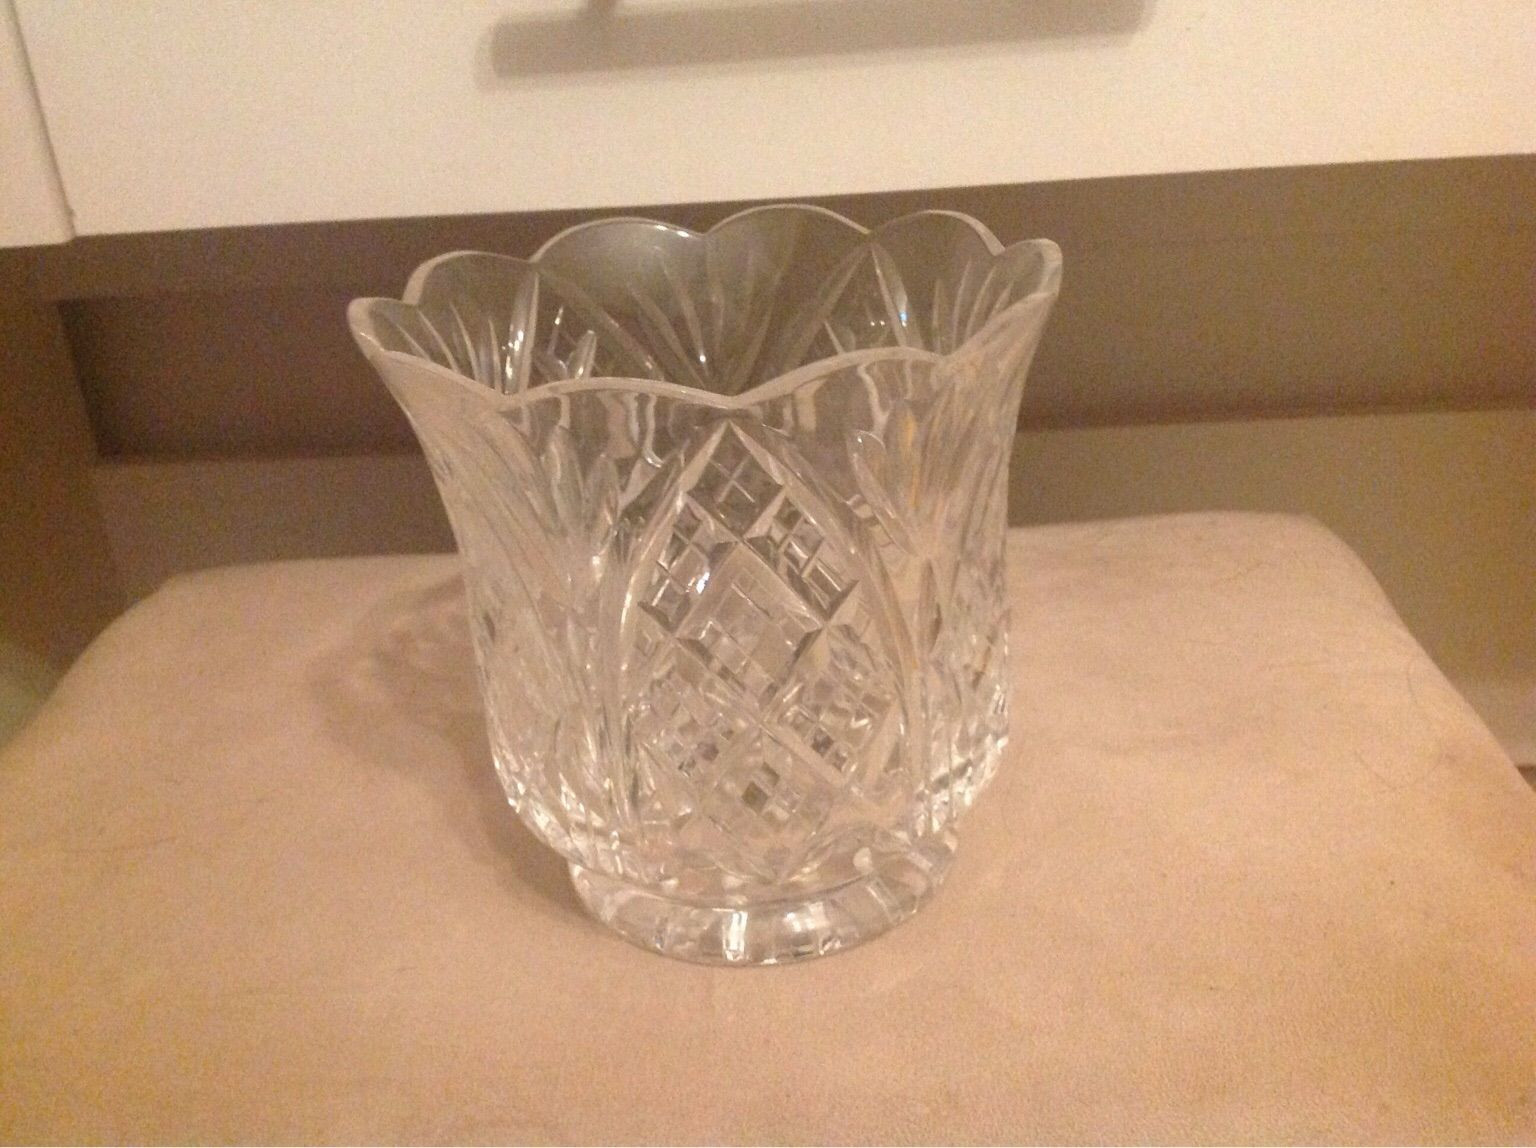 21 attractive Weller Pottery Vase Wild Rose 2023 free download weller pottery vase wild rose of https en shpock com i wmucfctt7rd3b1cr 2018 10 10t015529 with regard to waterford crystal vase 20af0c92